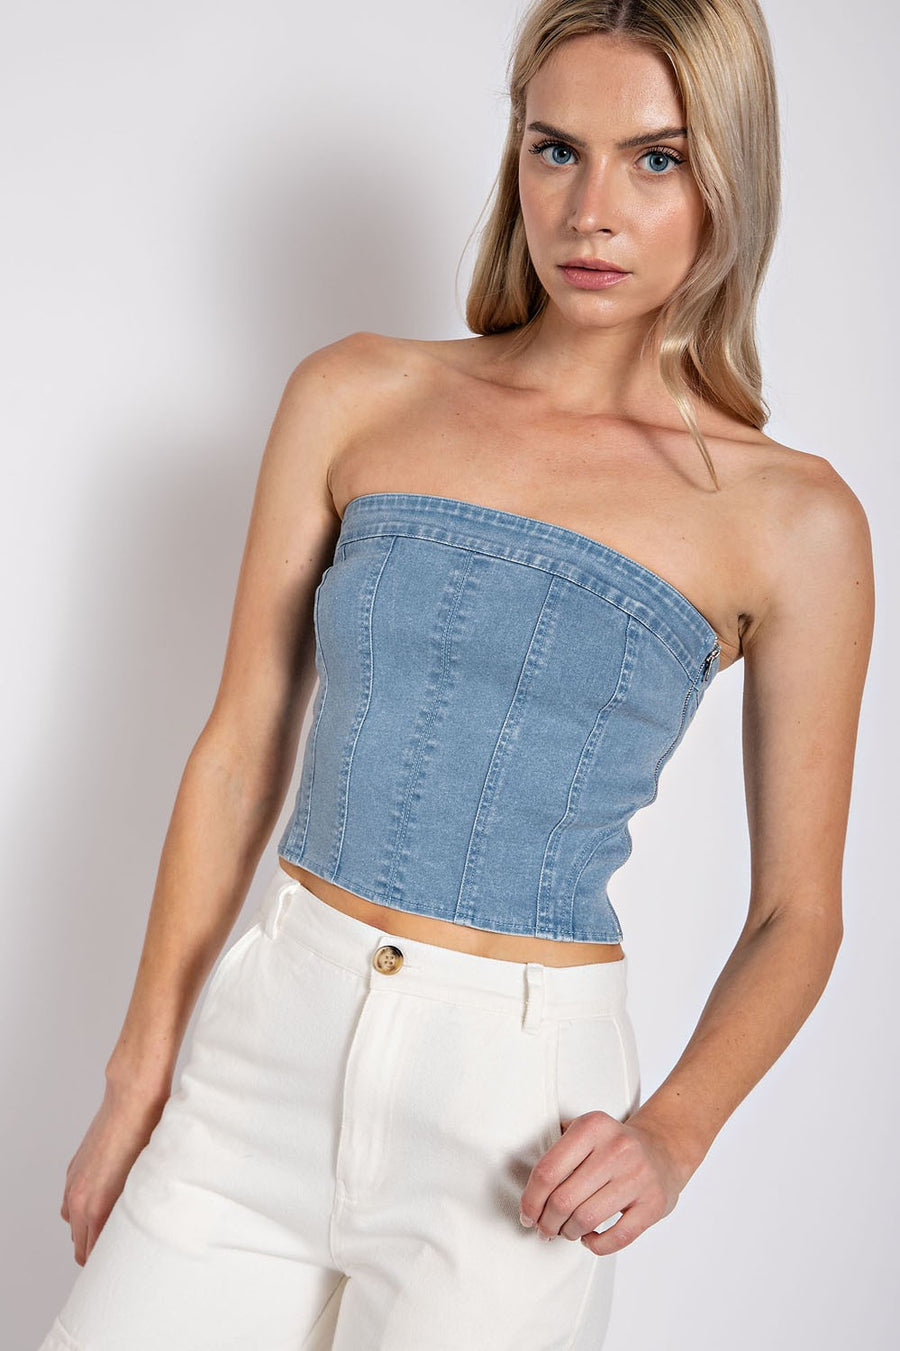 Model is wearing a denim, strapless tube top.